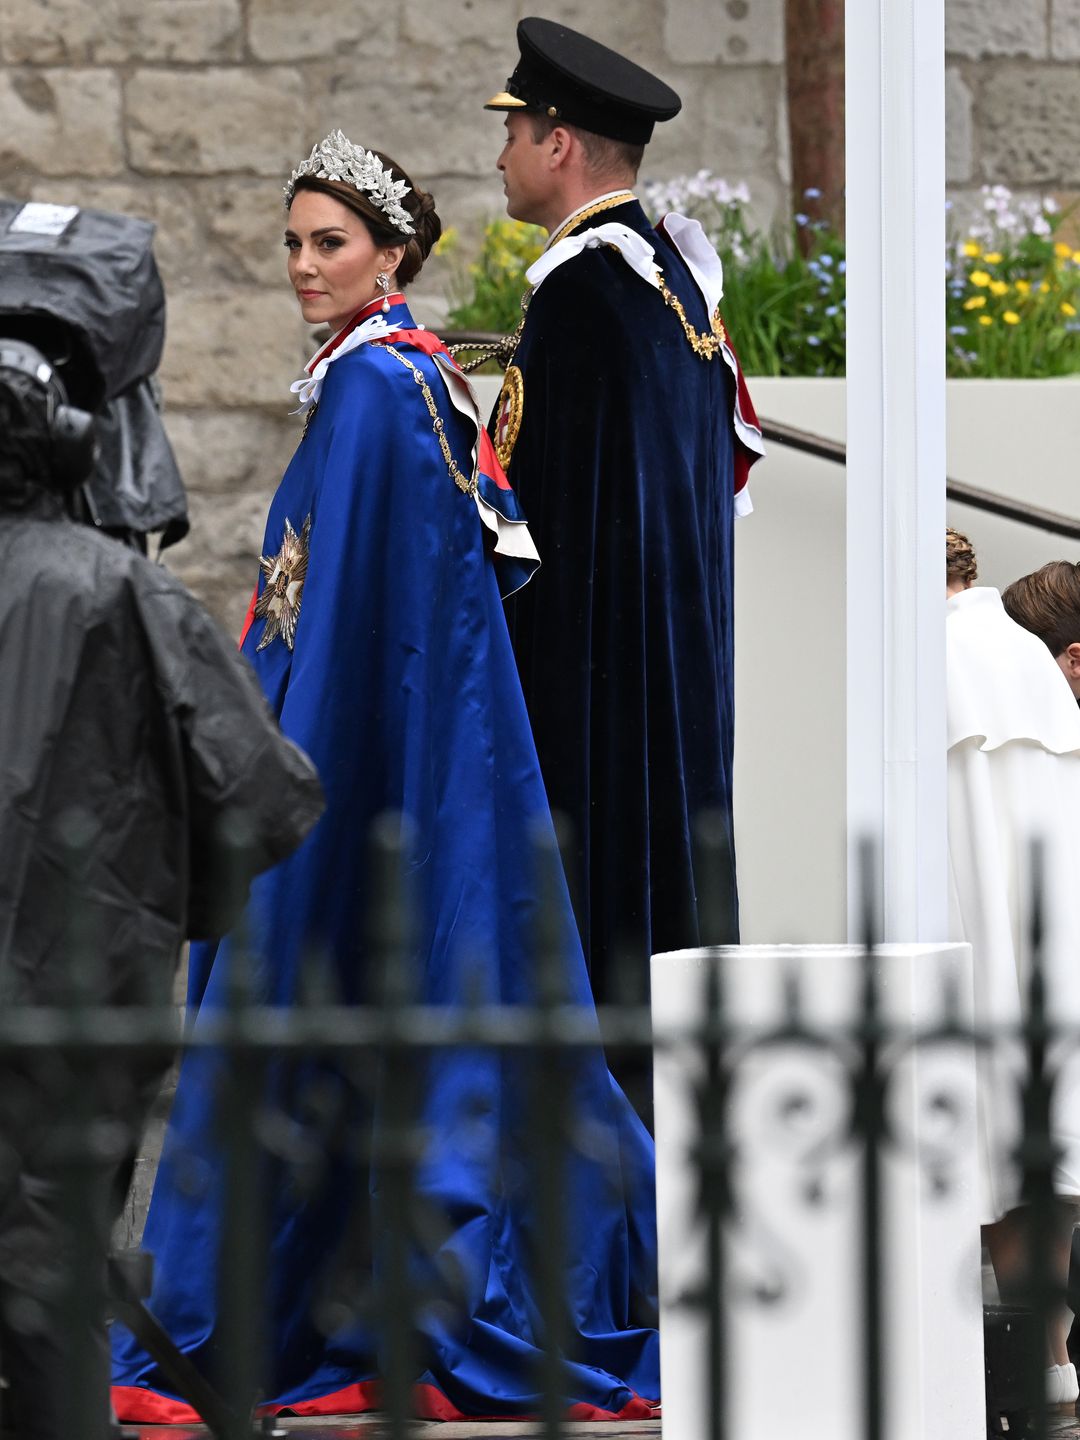 Princess Kate looked stunning in her headpiece and robes